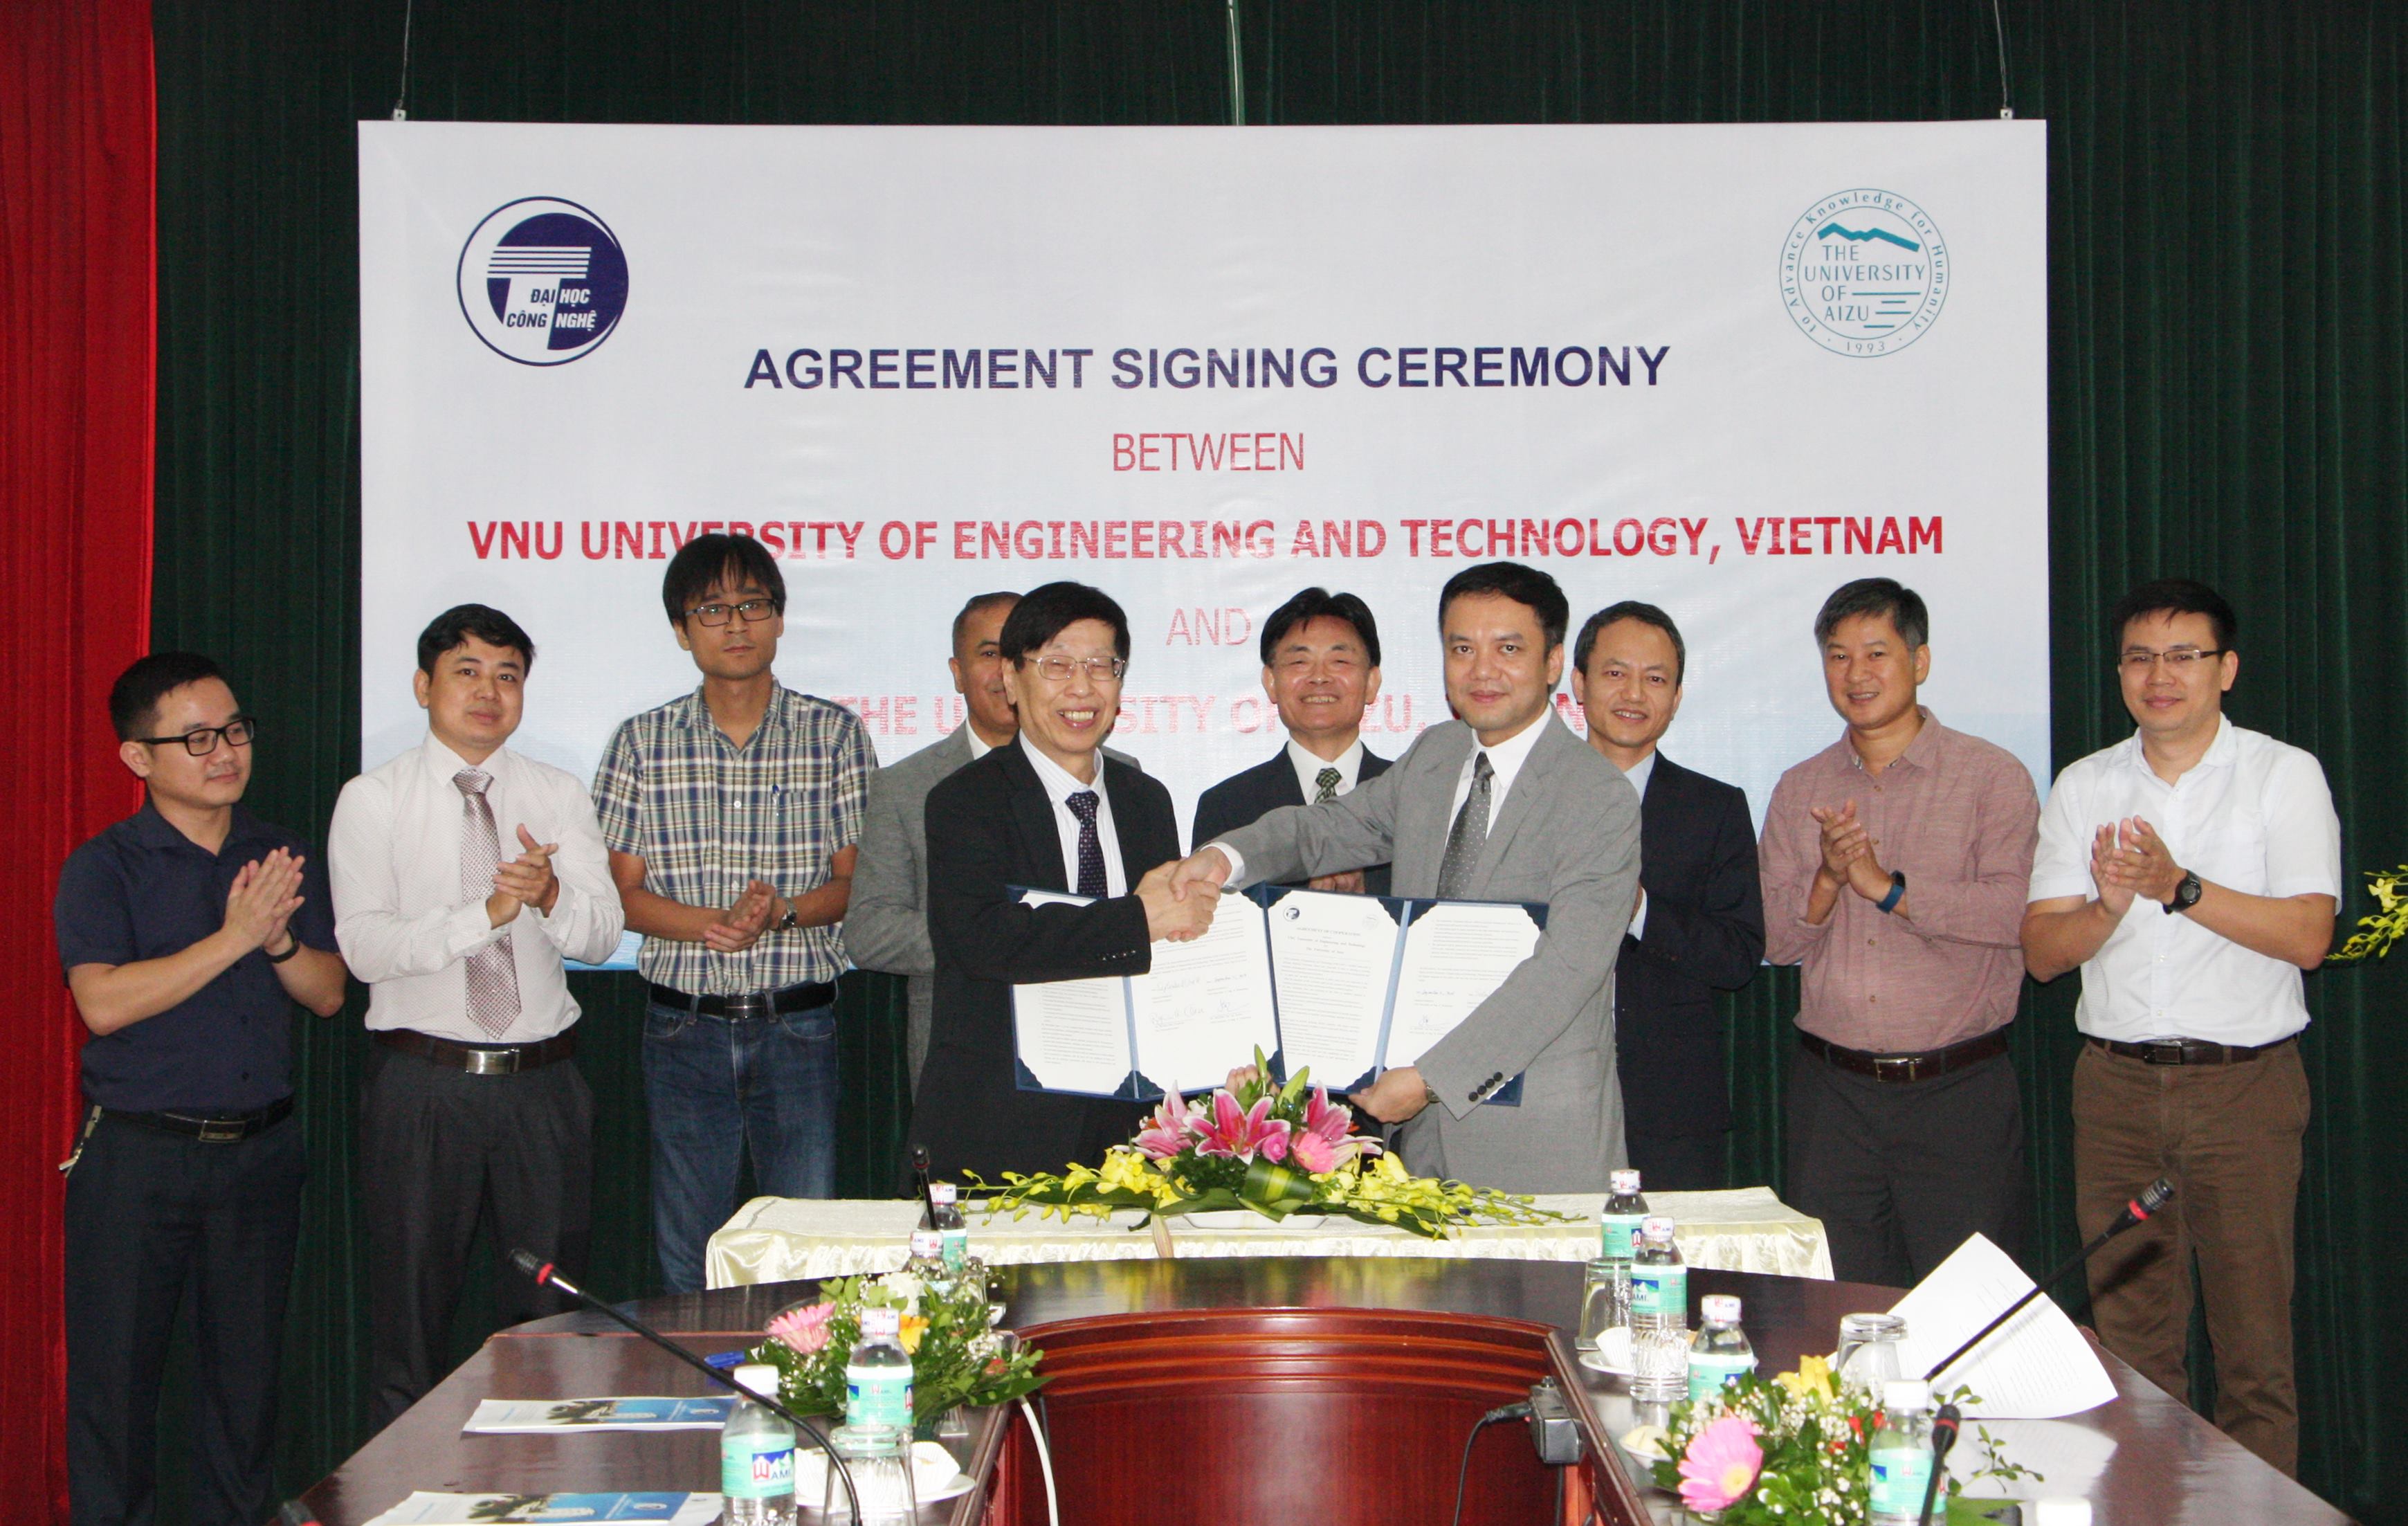 The University of Aizu updated the agreement of cooperation with the VNU University of Engineering and Technology (VNU-UET), Hanoi, Vietnam